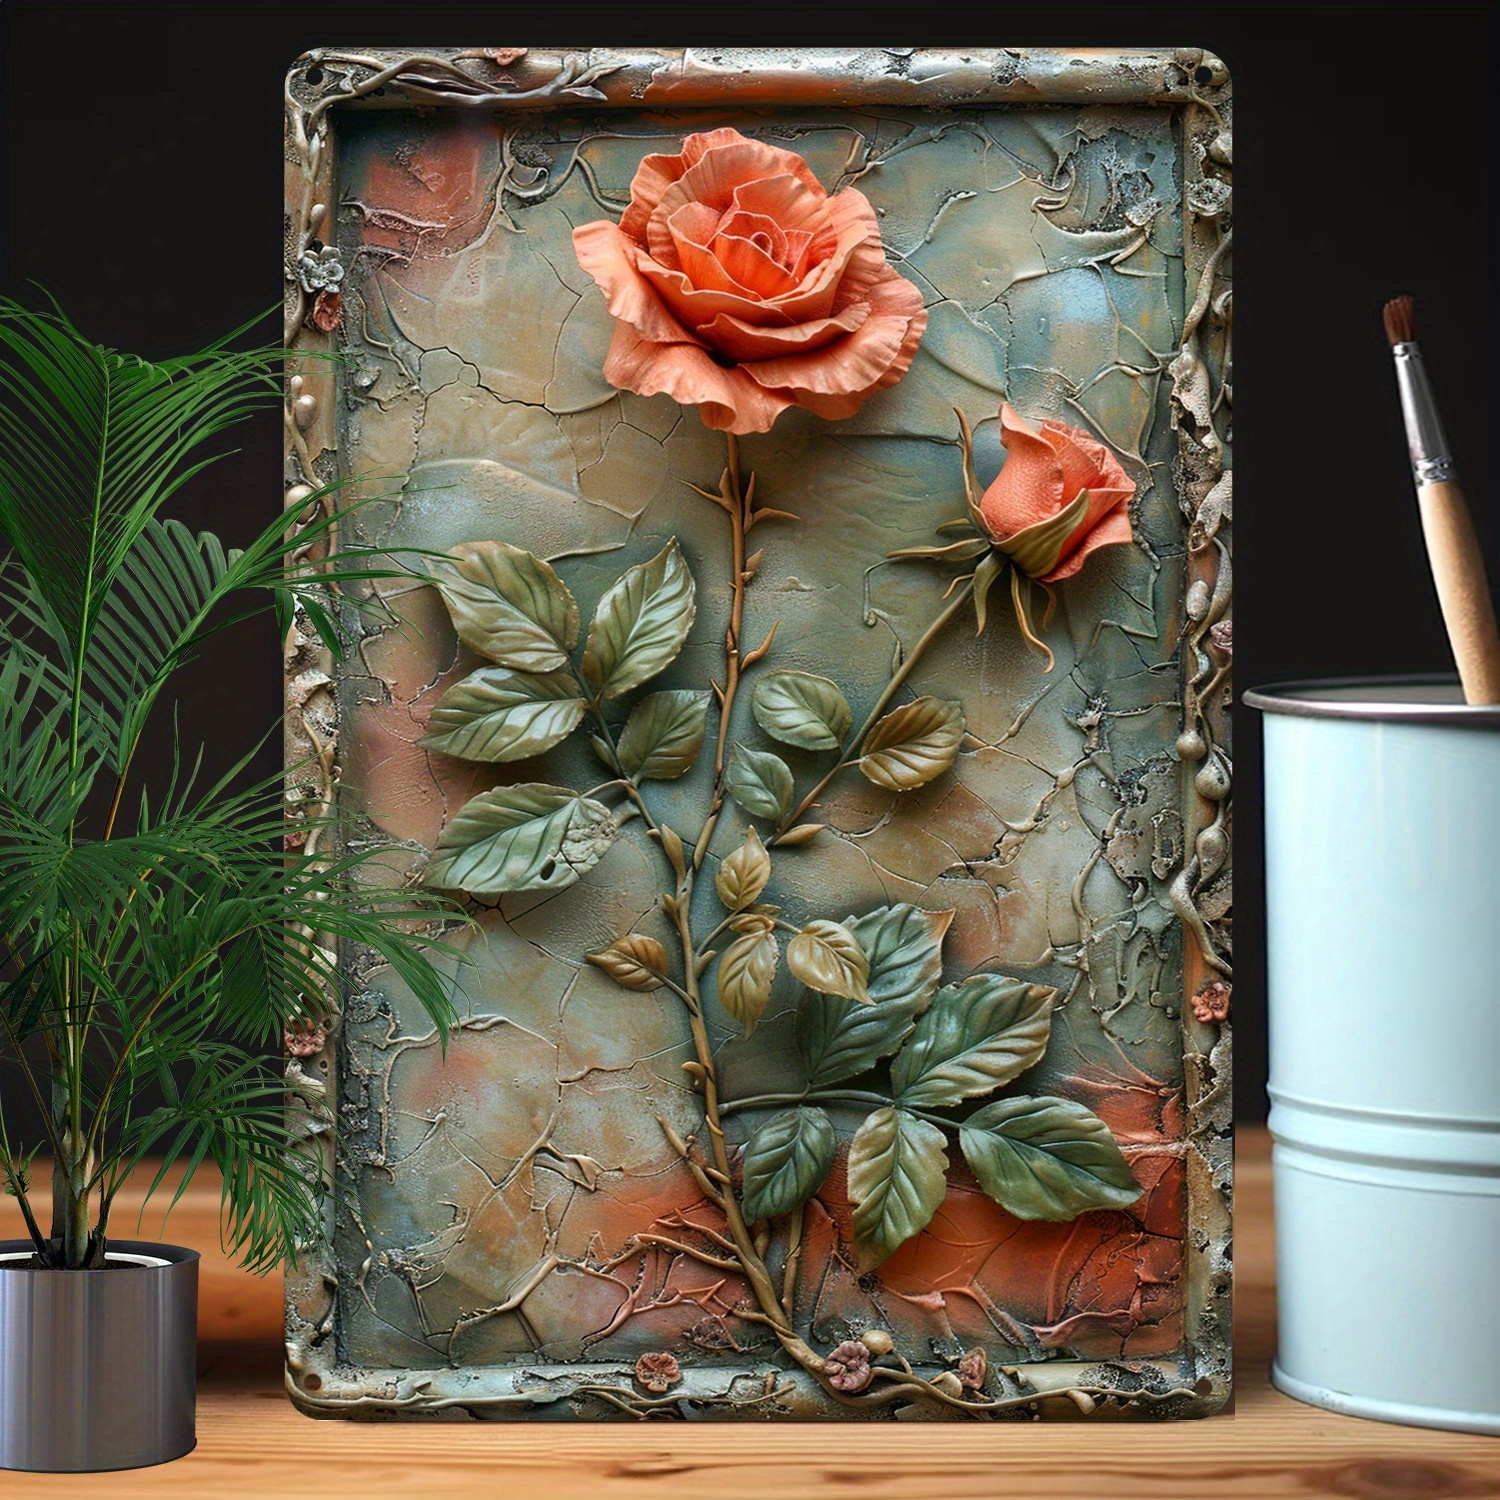 

Water-resistant Aluminum Metal Wall Art, 8x12 Inch 3d Embossed Rose Design, High Durability Decorative Tin Sign For Home & Garden, Unique Floral Decor Gift - 1 Piece A2922